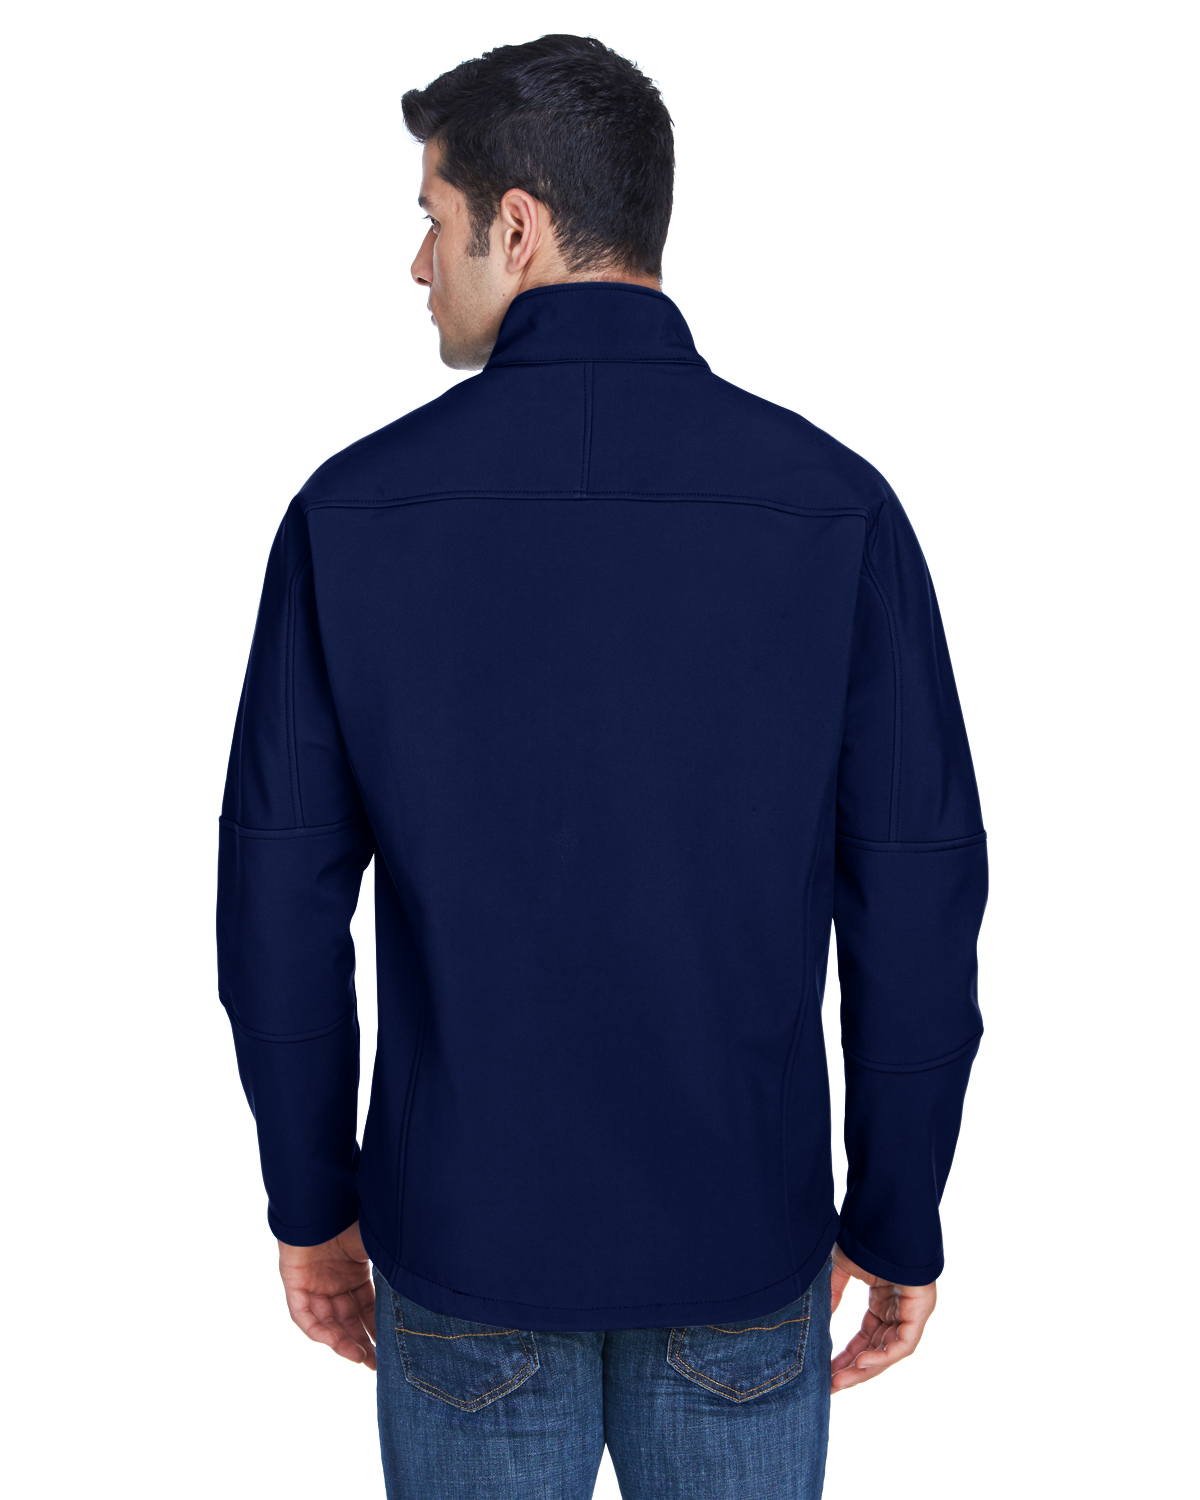 Men's Three-Layer Fleece Bonded Soft Shell Technical Jacket - CLASSIC NAVY - S - image 2 of 3